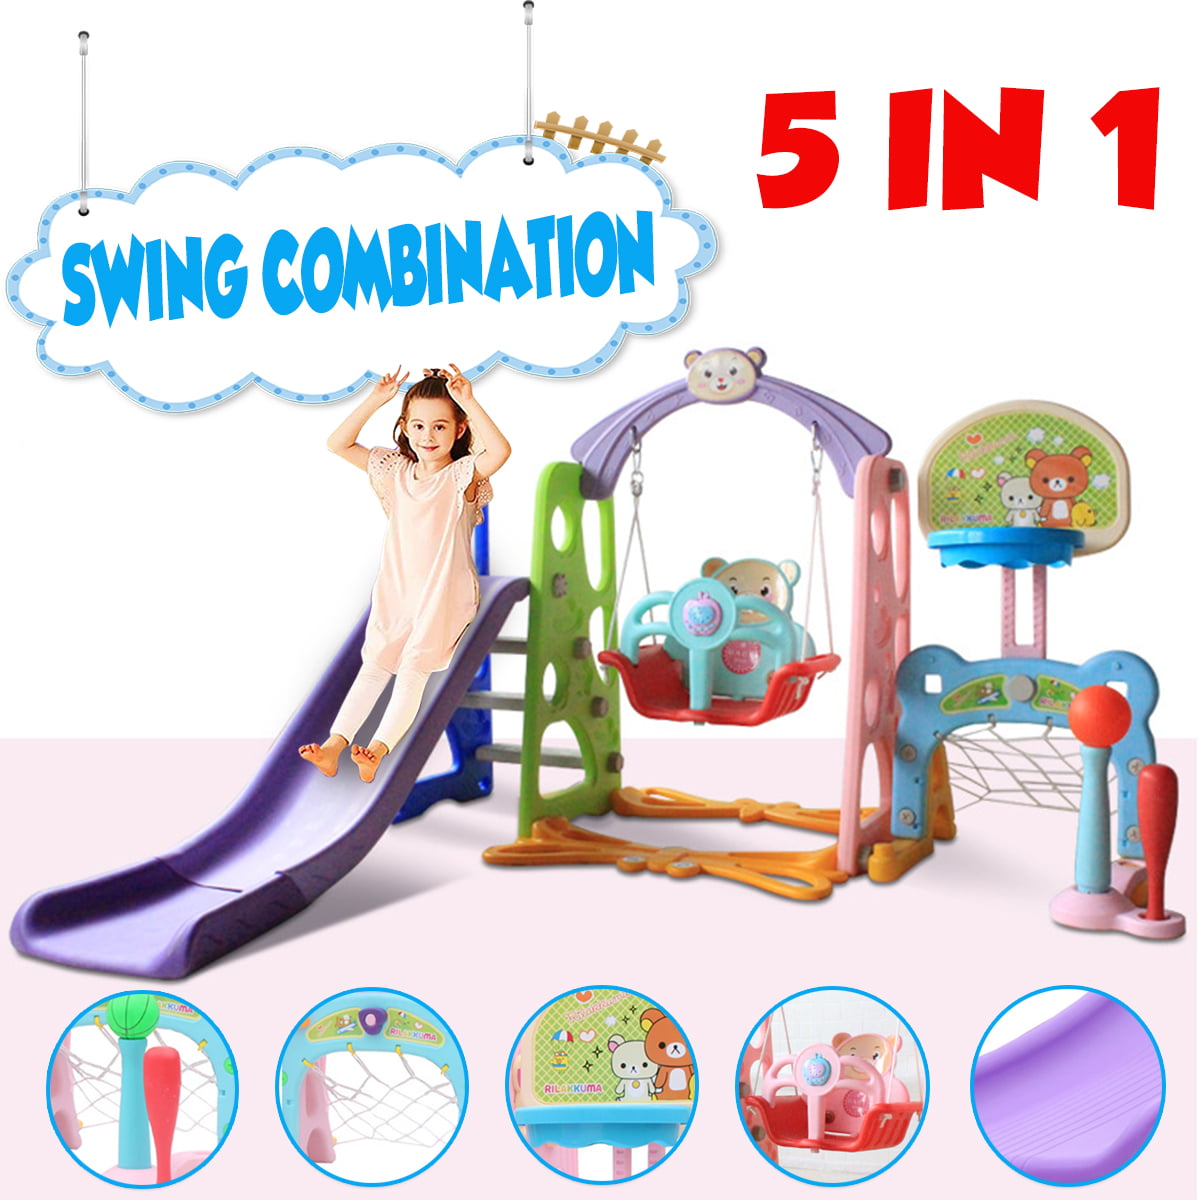 ADORNEVE Slide and Swing Set 3-in-1 for Toddlers Play Climber Freestanding Slides Playset Kids Playground Toy with Basketball Hoop for Indoor Outdoor 